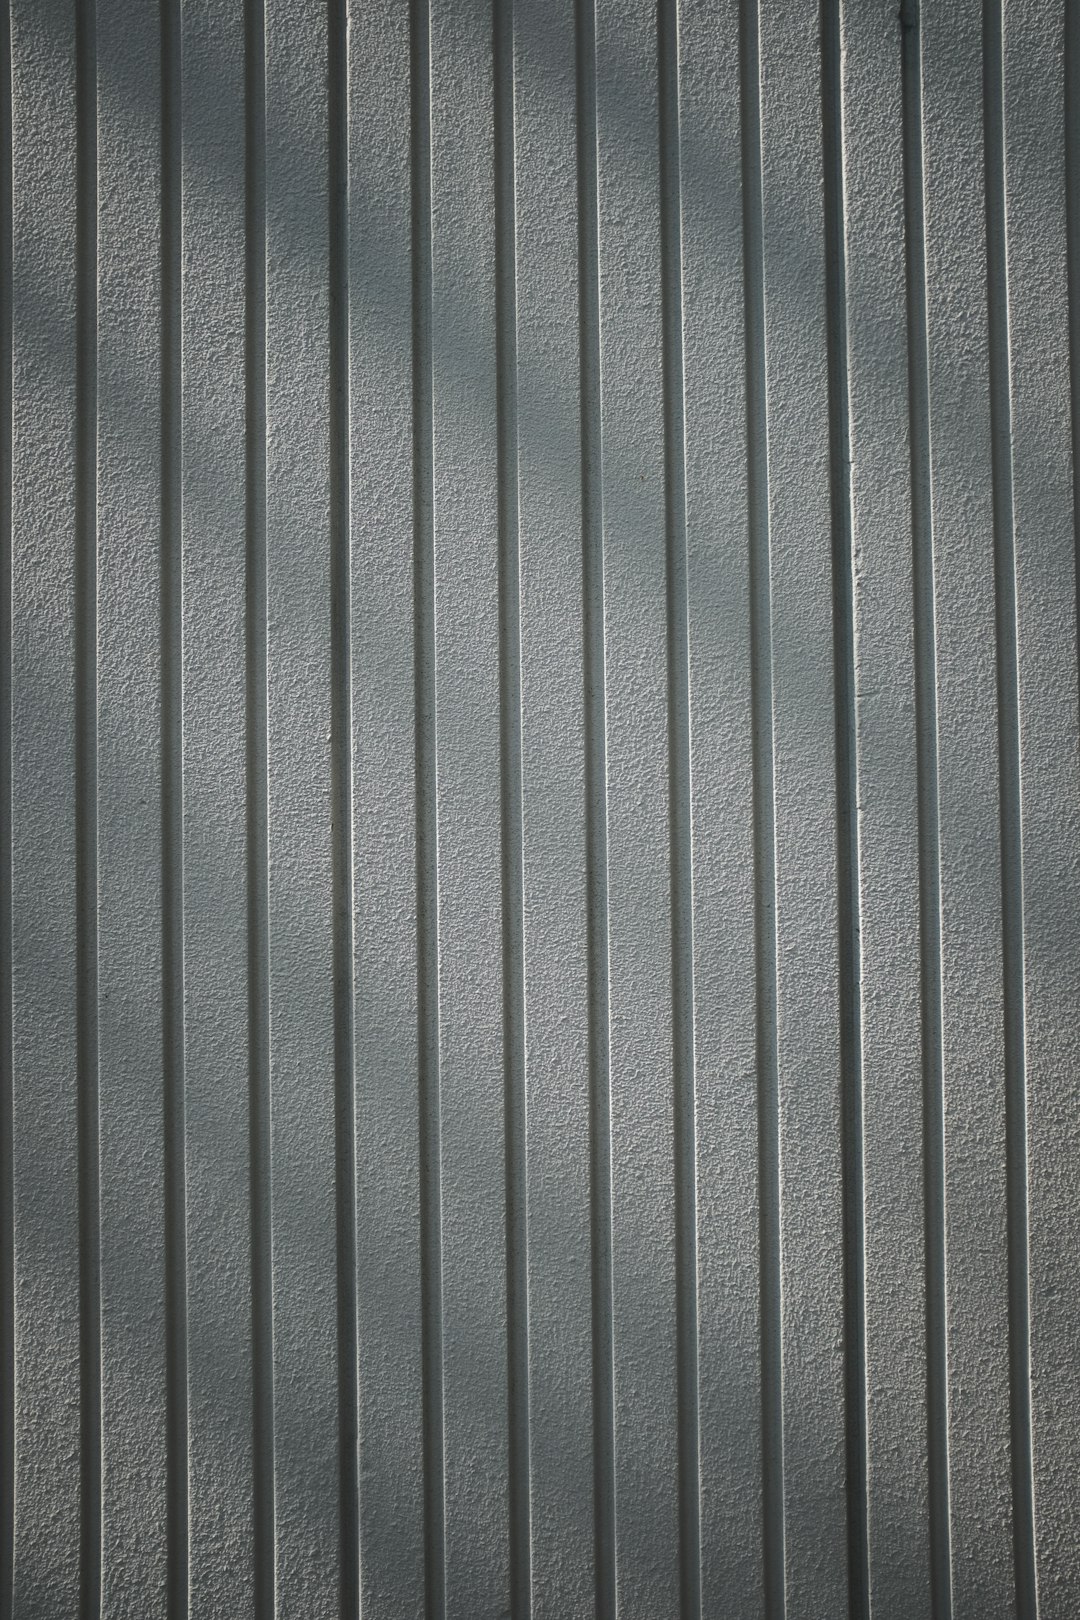 black and gray striped textile